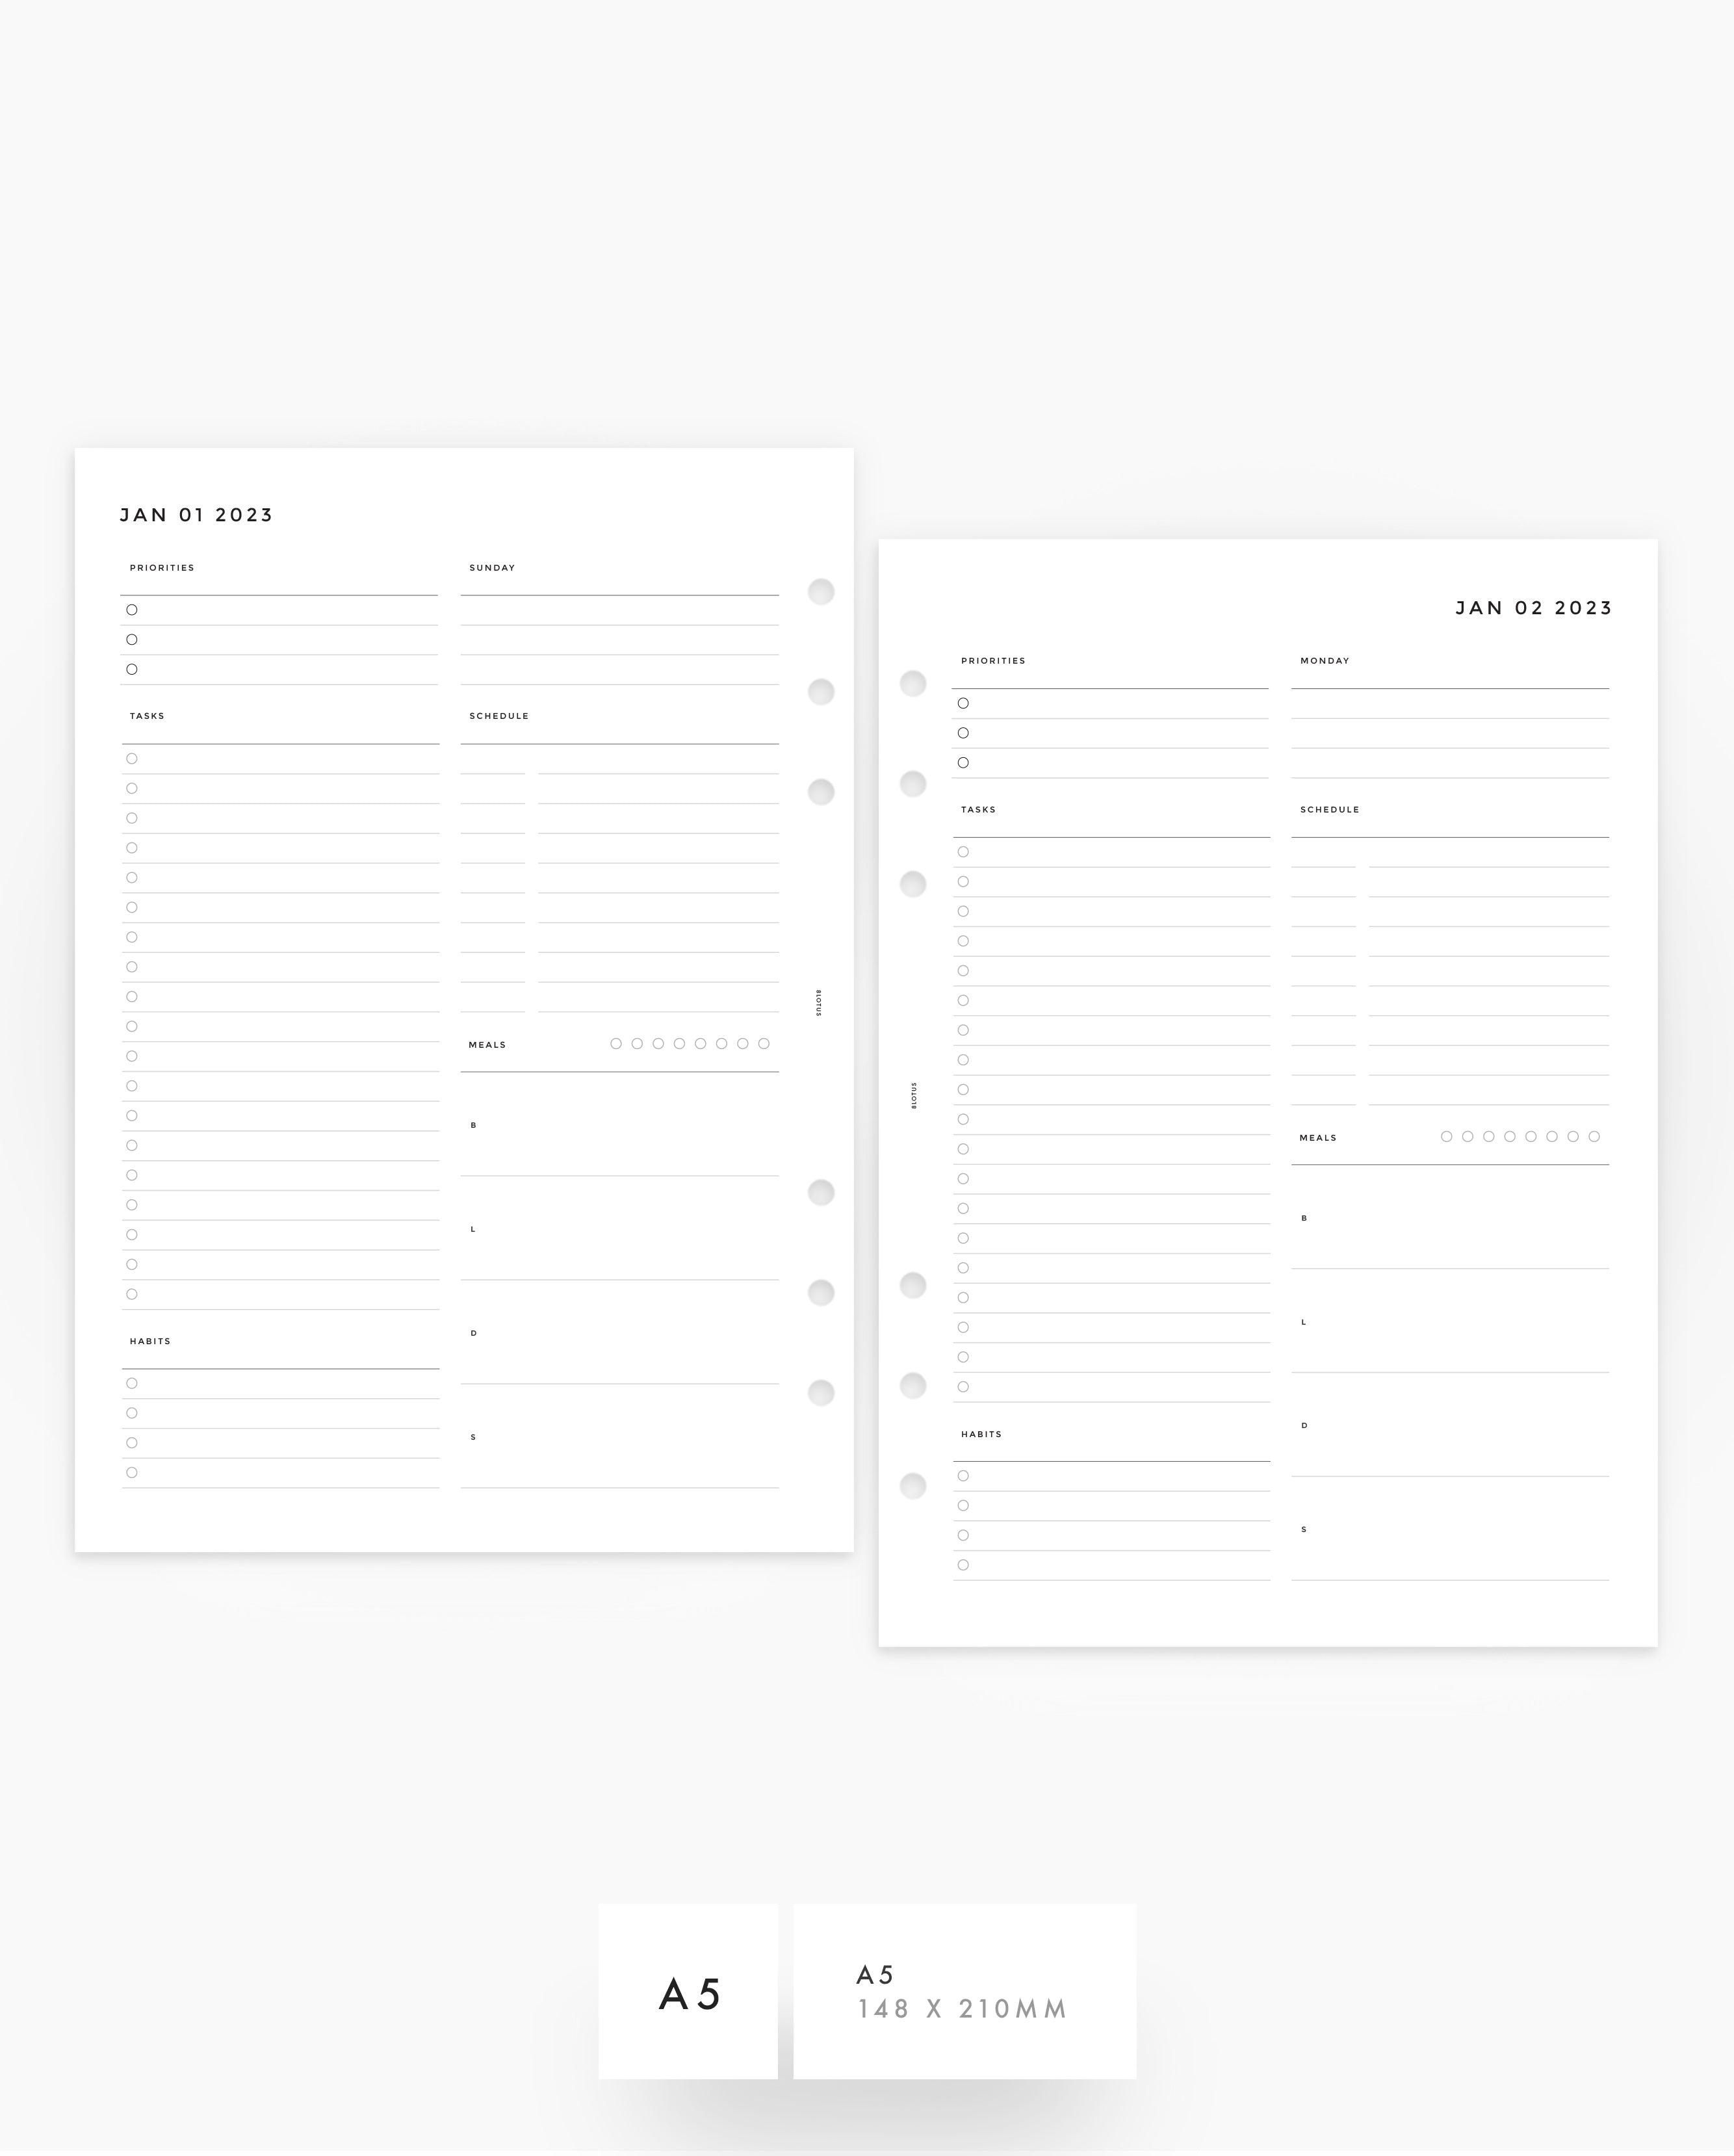 MN040 - 2023 DAILY PLANNER - DO1P - PDF